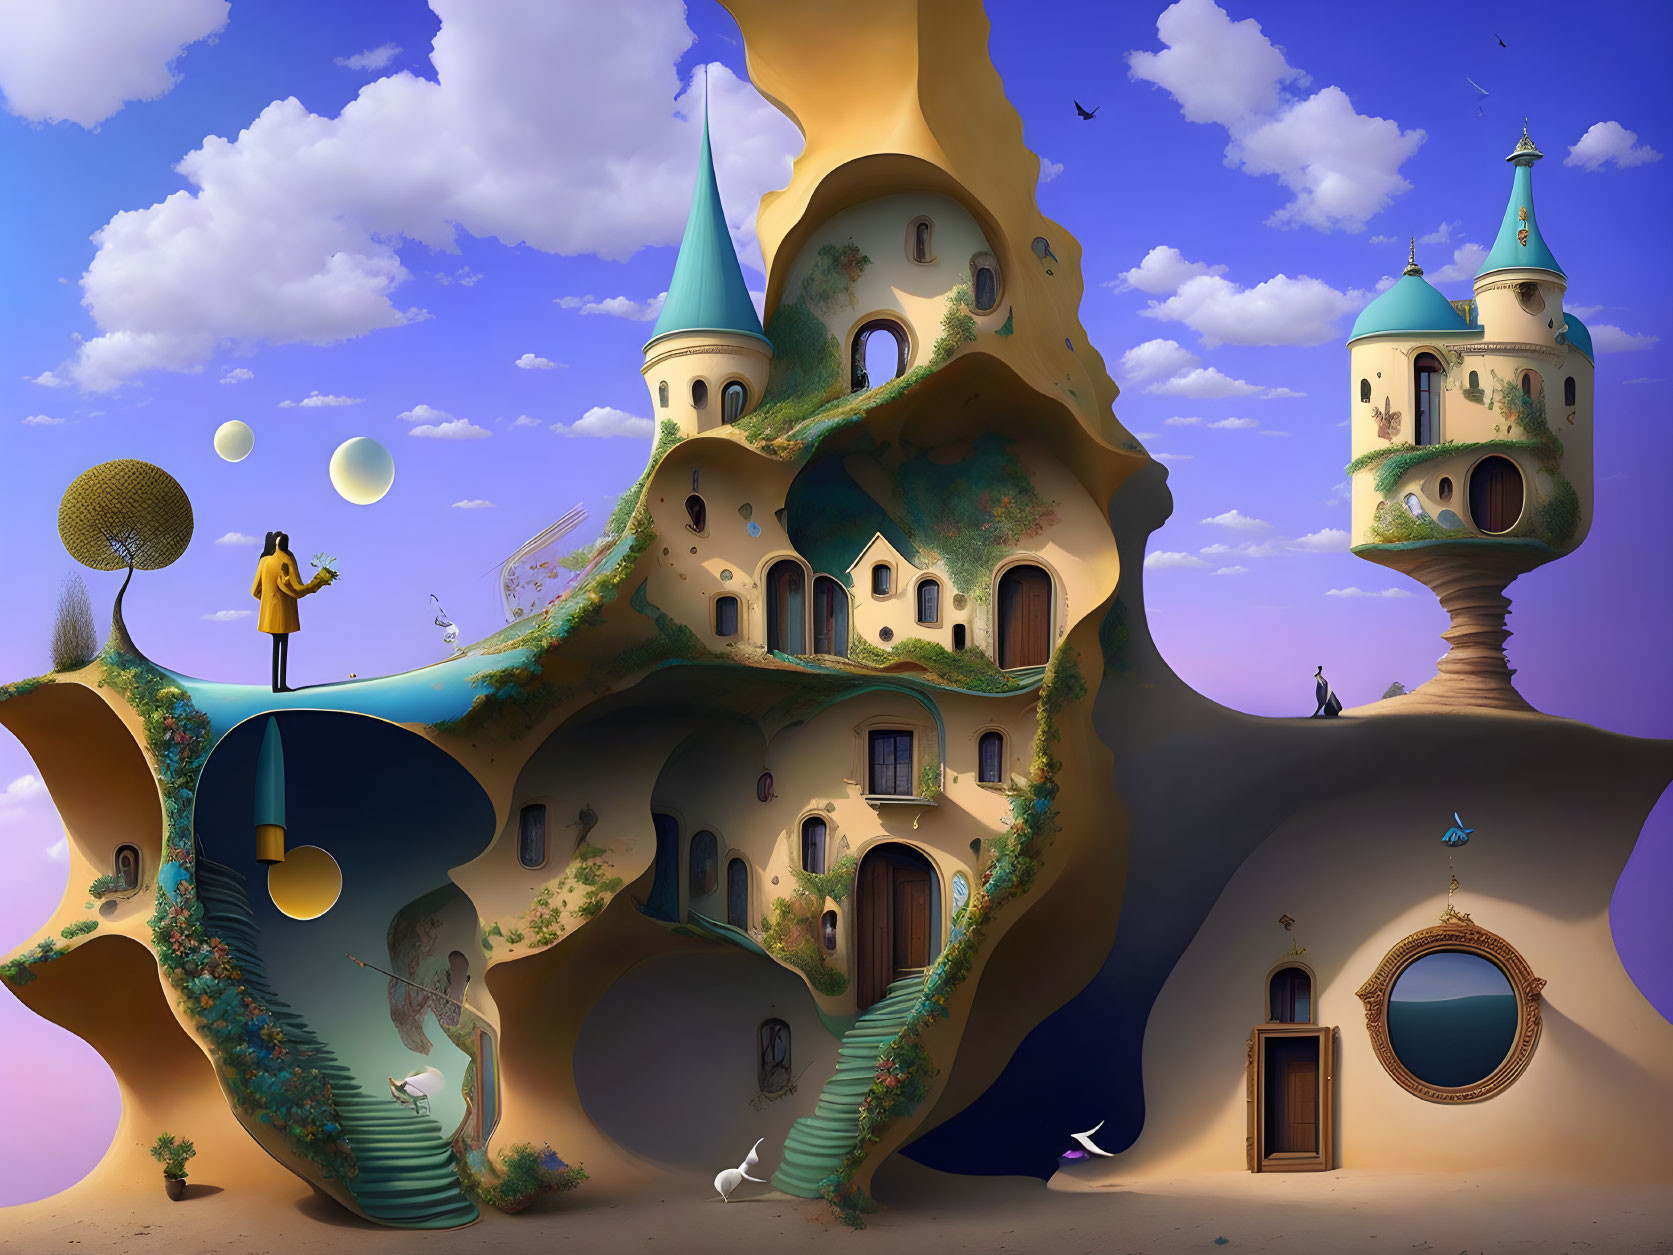 Fantasy landscape with organic castle, floating bubbles, and tiny figures